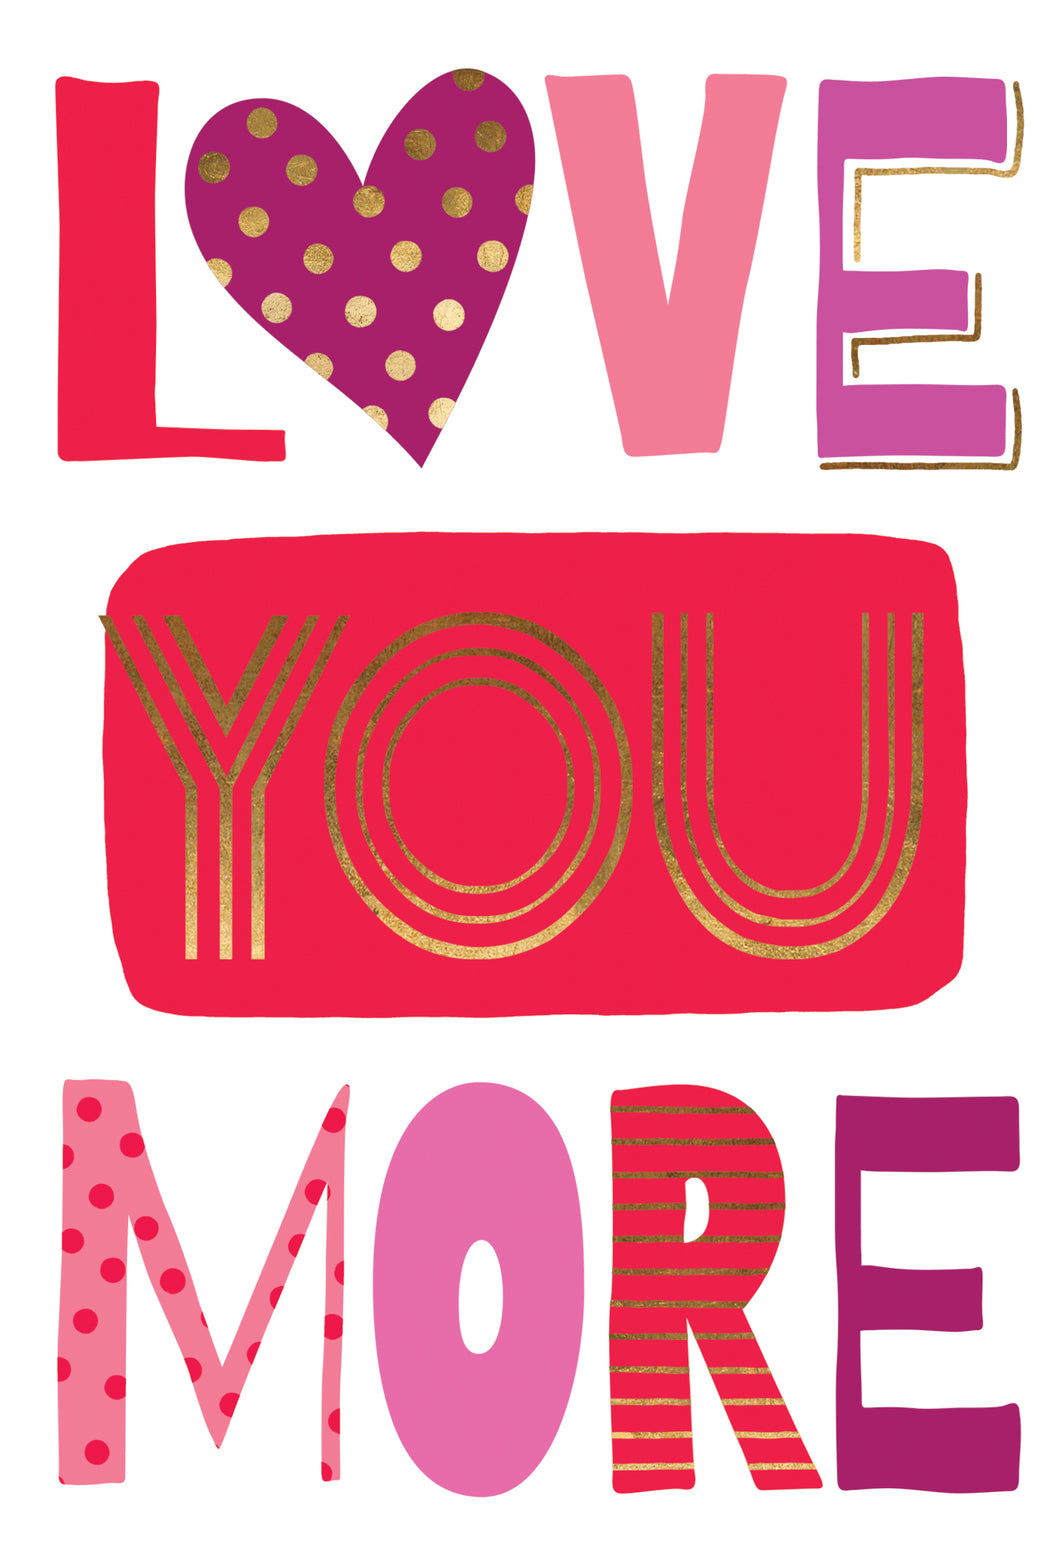 Love You More Valentine's Card